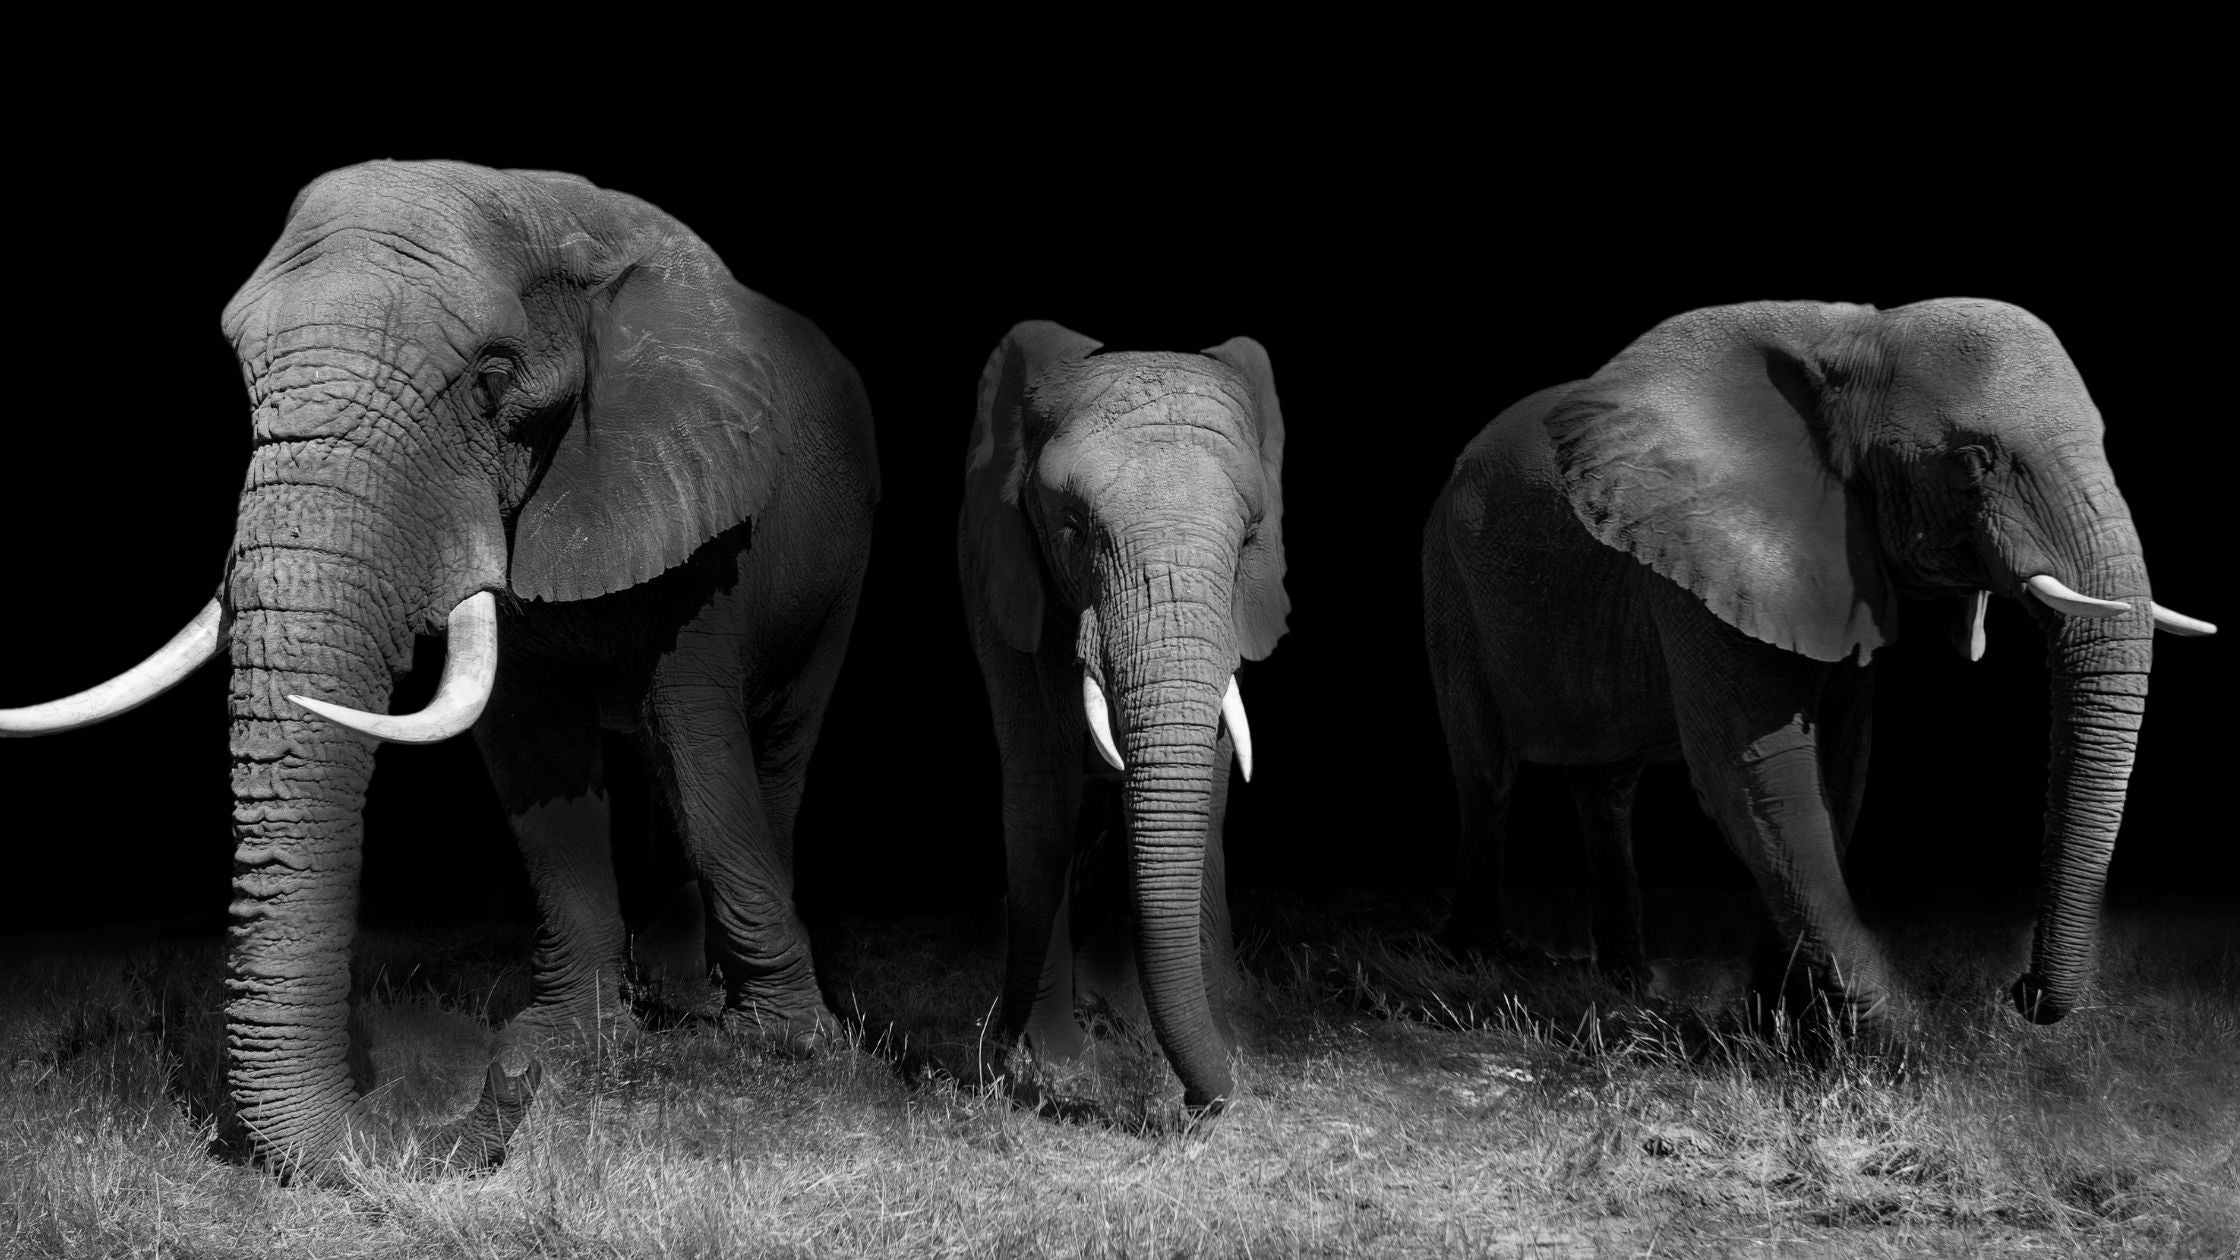 Three elephants were captured in a black and white photograph, standing next to each other. 